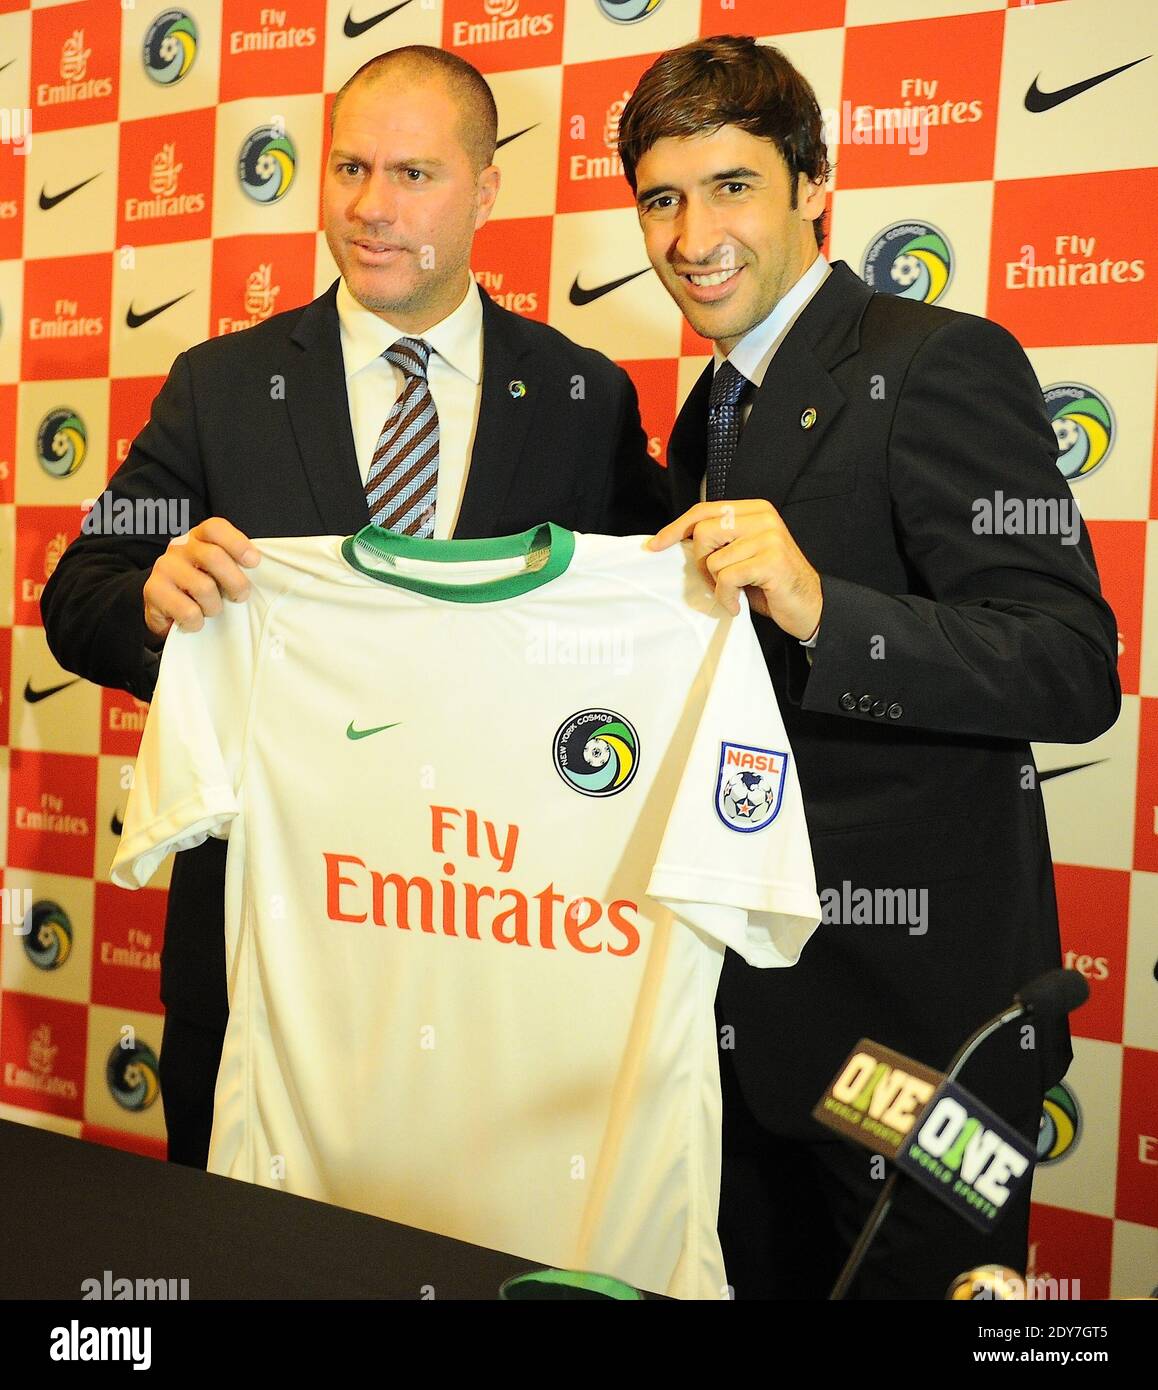 https://c8.alamy.com/comp/2DY7GT5/press-conference-to-introduce-new-york-cosmos-and-forward-real-madrid-legend-raul-gonzales-blanco-with-new-york-cosmos-head-coach-giovanni-savarese-at-the-four-seasons-hotel-new-york-ny-on-december-9-2014-famous-spanish-bullfighter-enrique-ponce-was-also-attending-the-press-conference-photo-by-morgan-dessallesabacapresscom-2DY7GT5.jpg